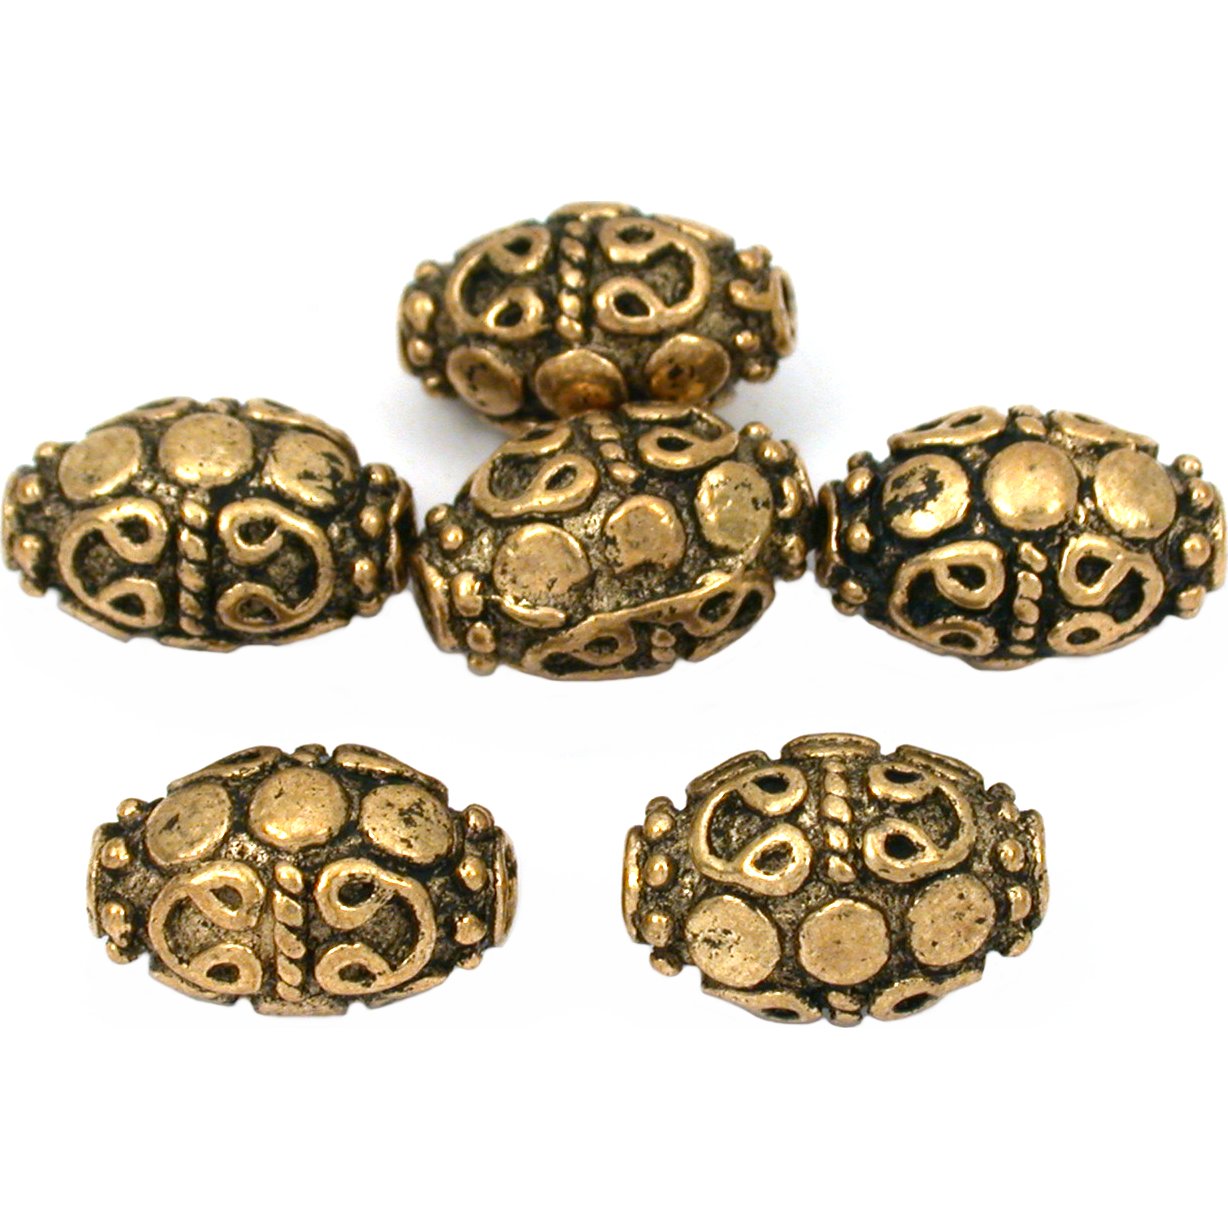 Bali Barrel Oval Antique Gold Plated Beads 13mm 17 Grams 6Pcs Approx.